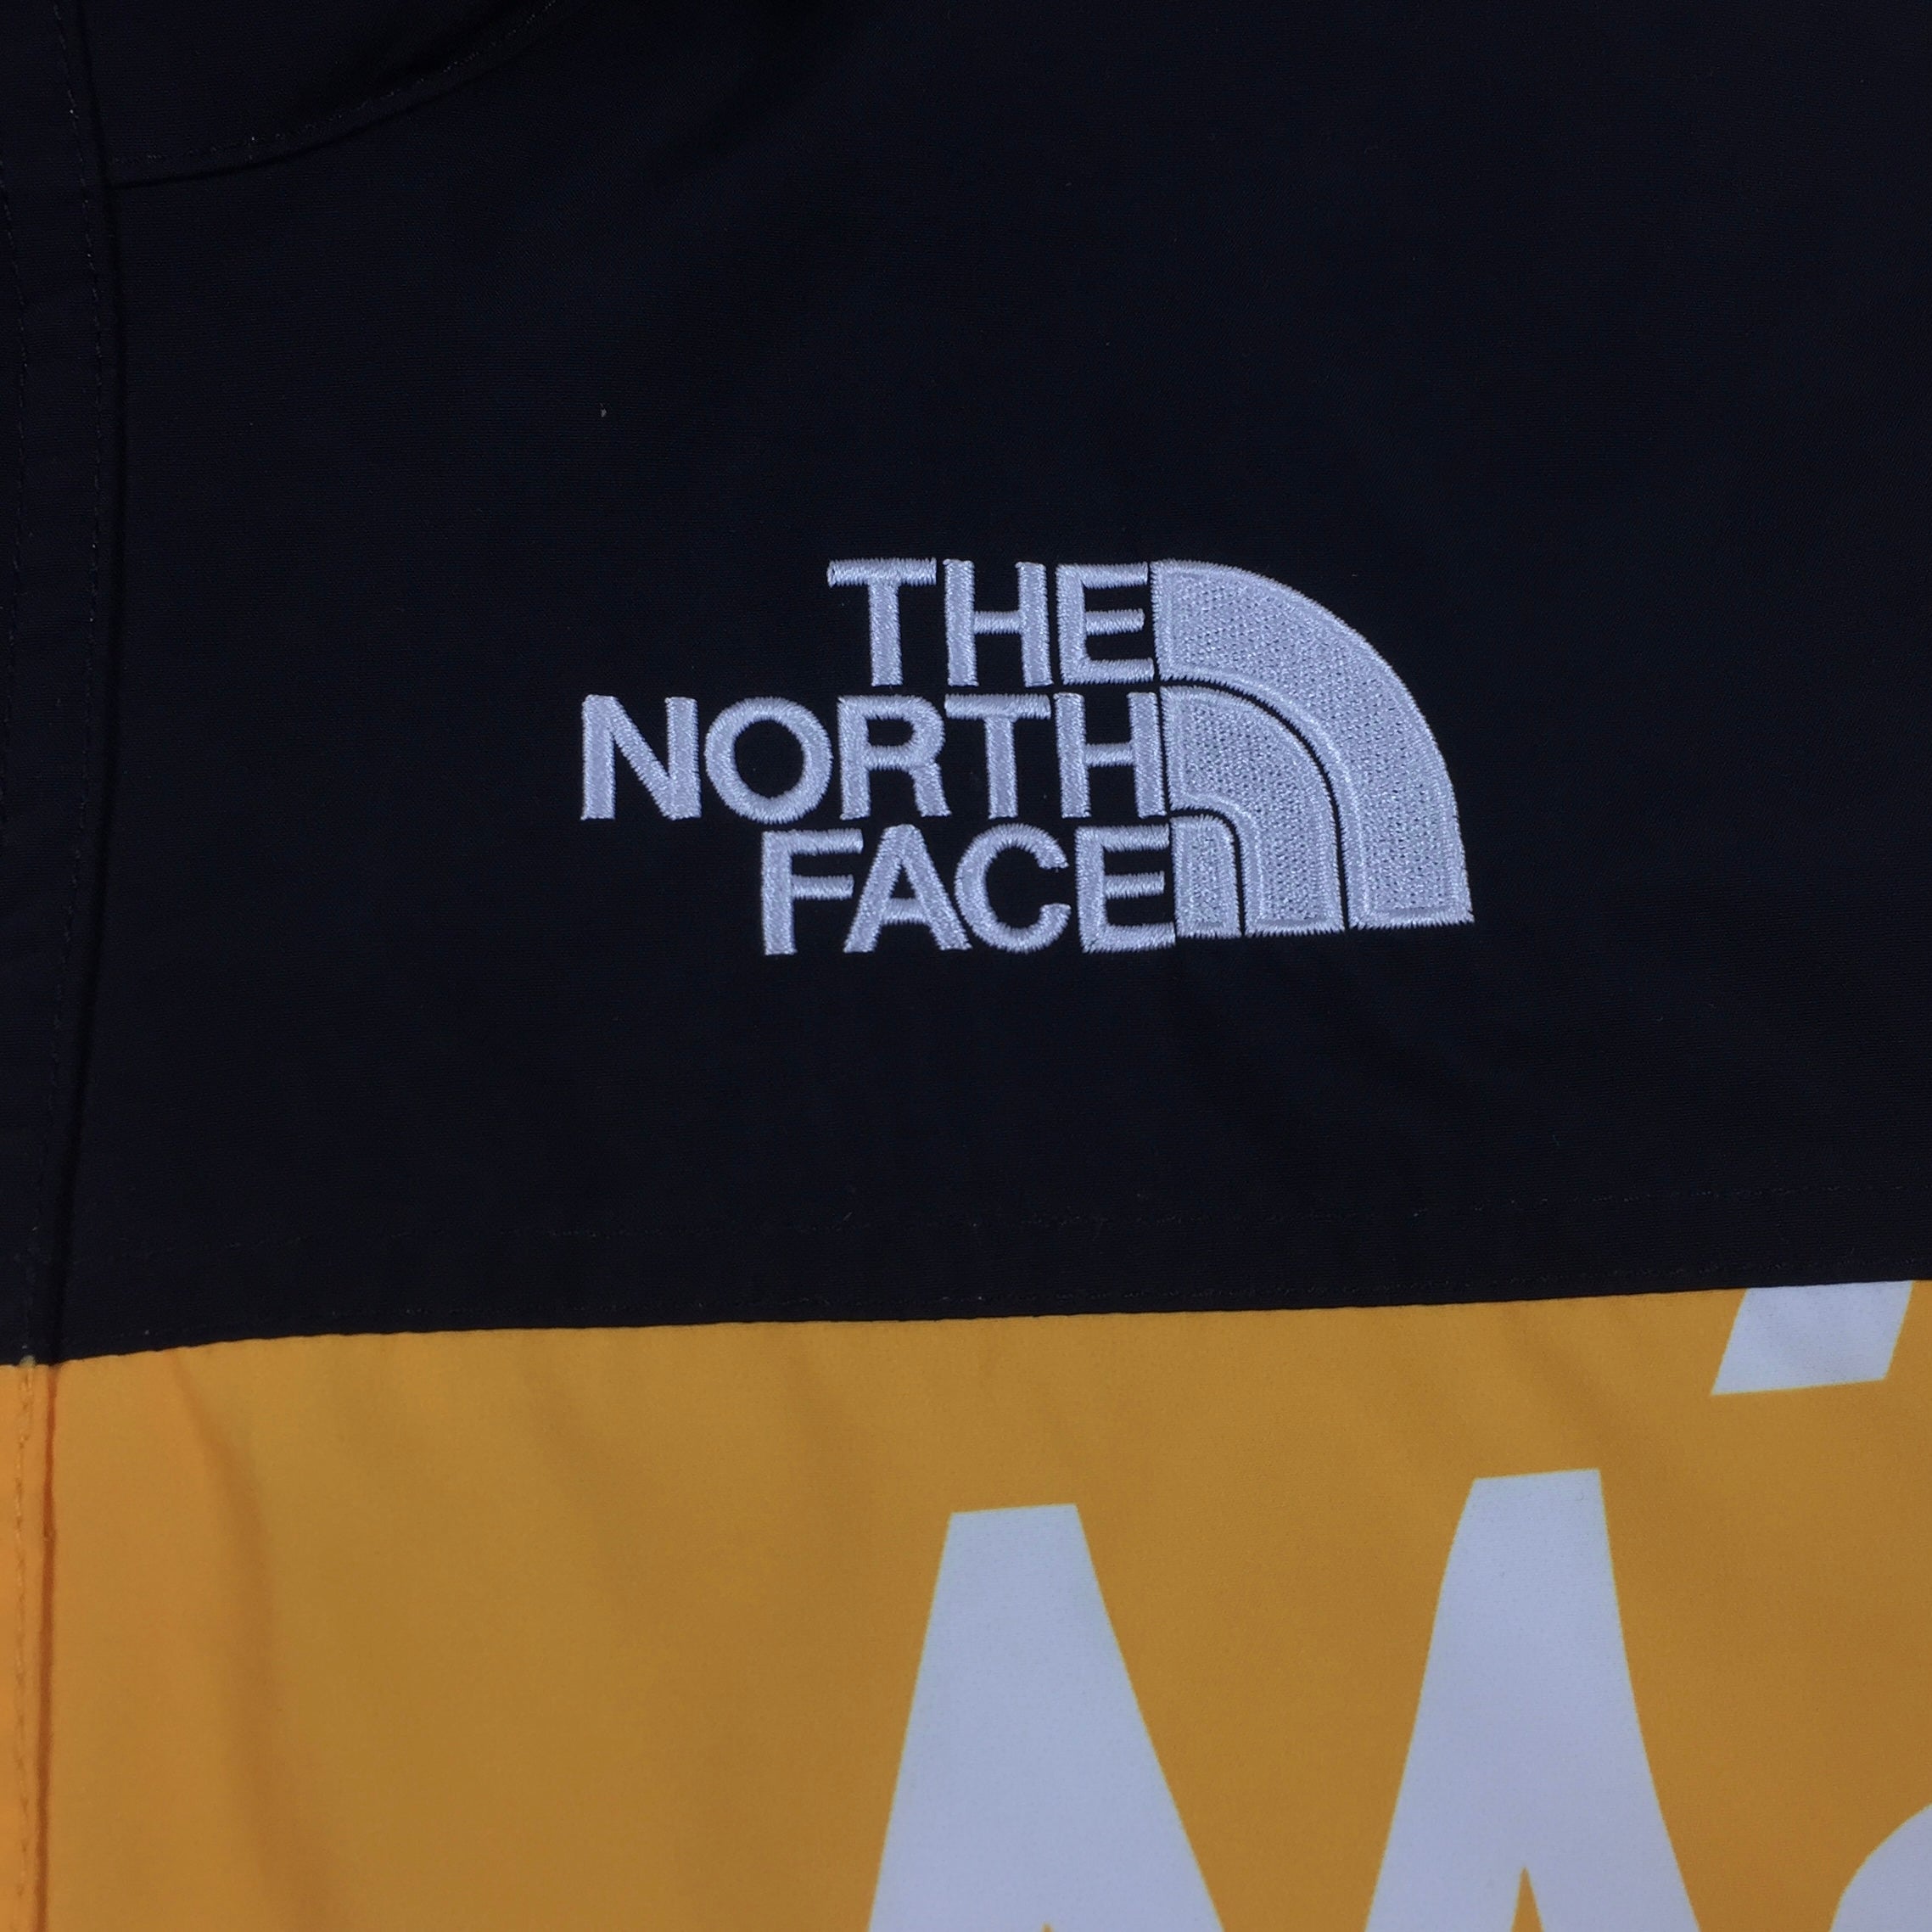 2015 Supreme x The North Face By Any Means Necessary Yellow Pullover